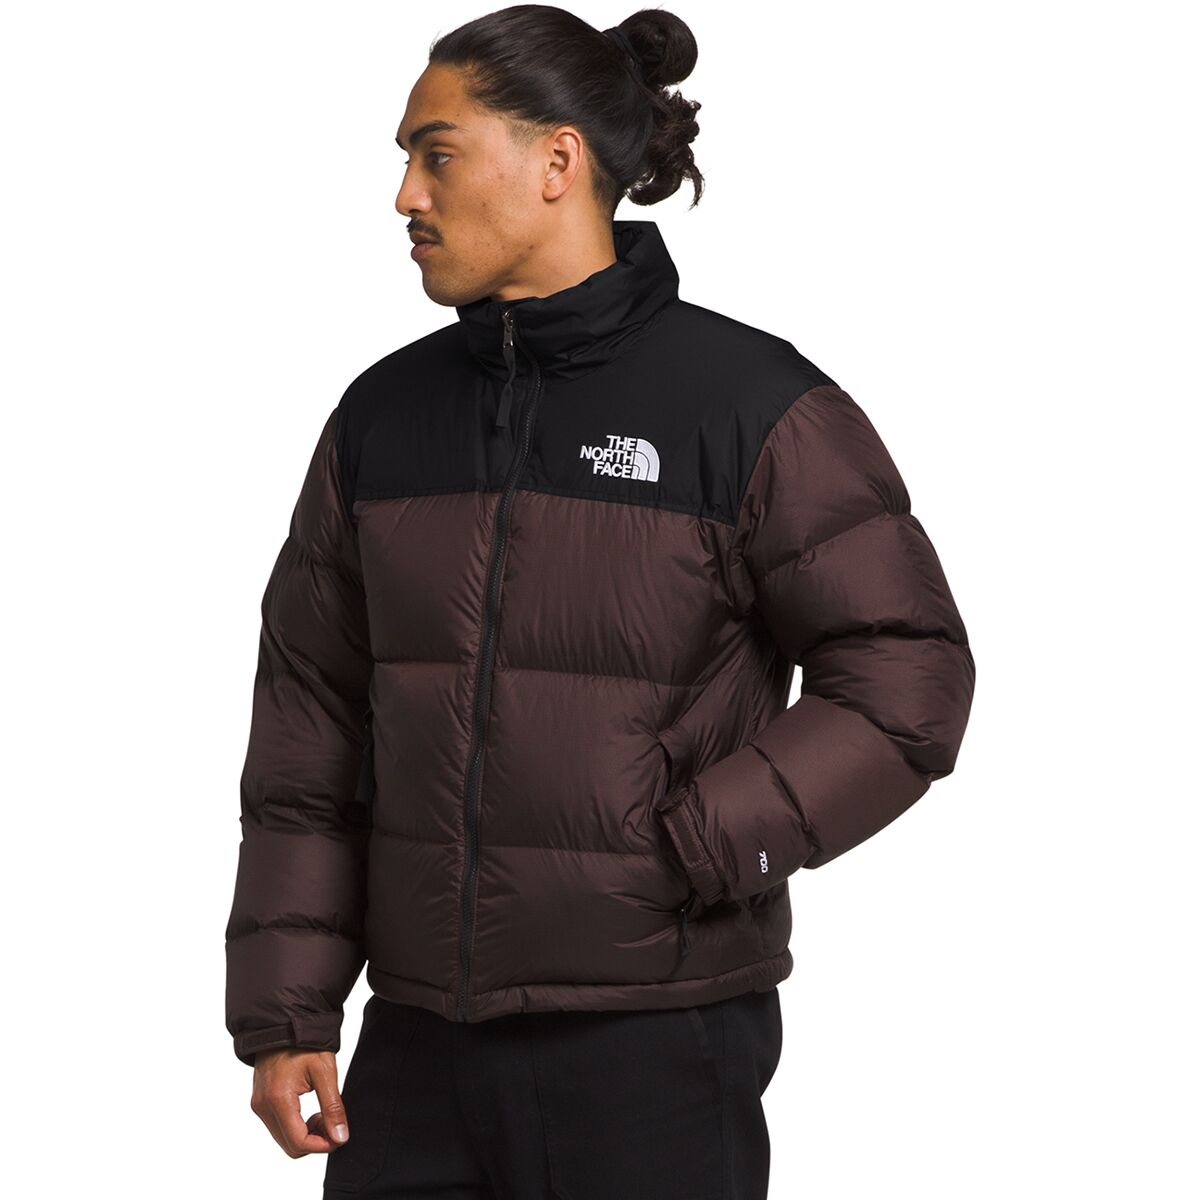 The North Face Zarre Jacket 21-22